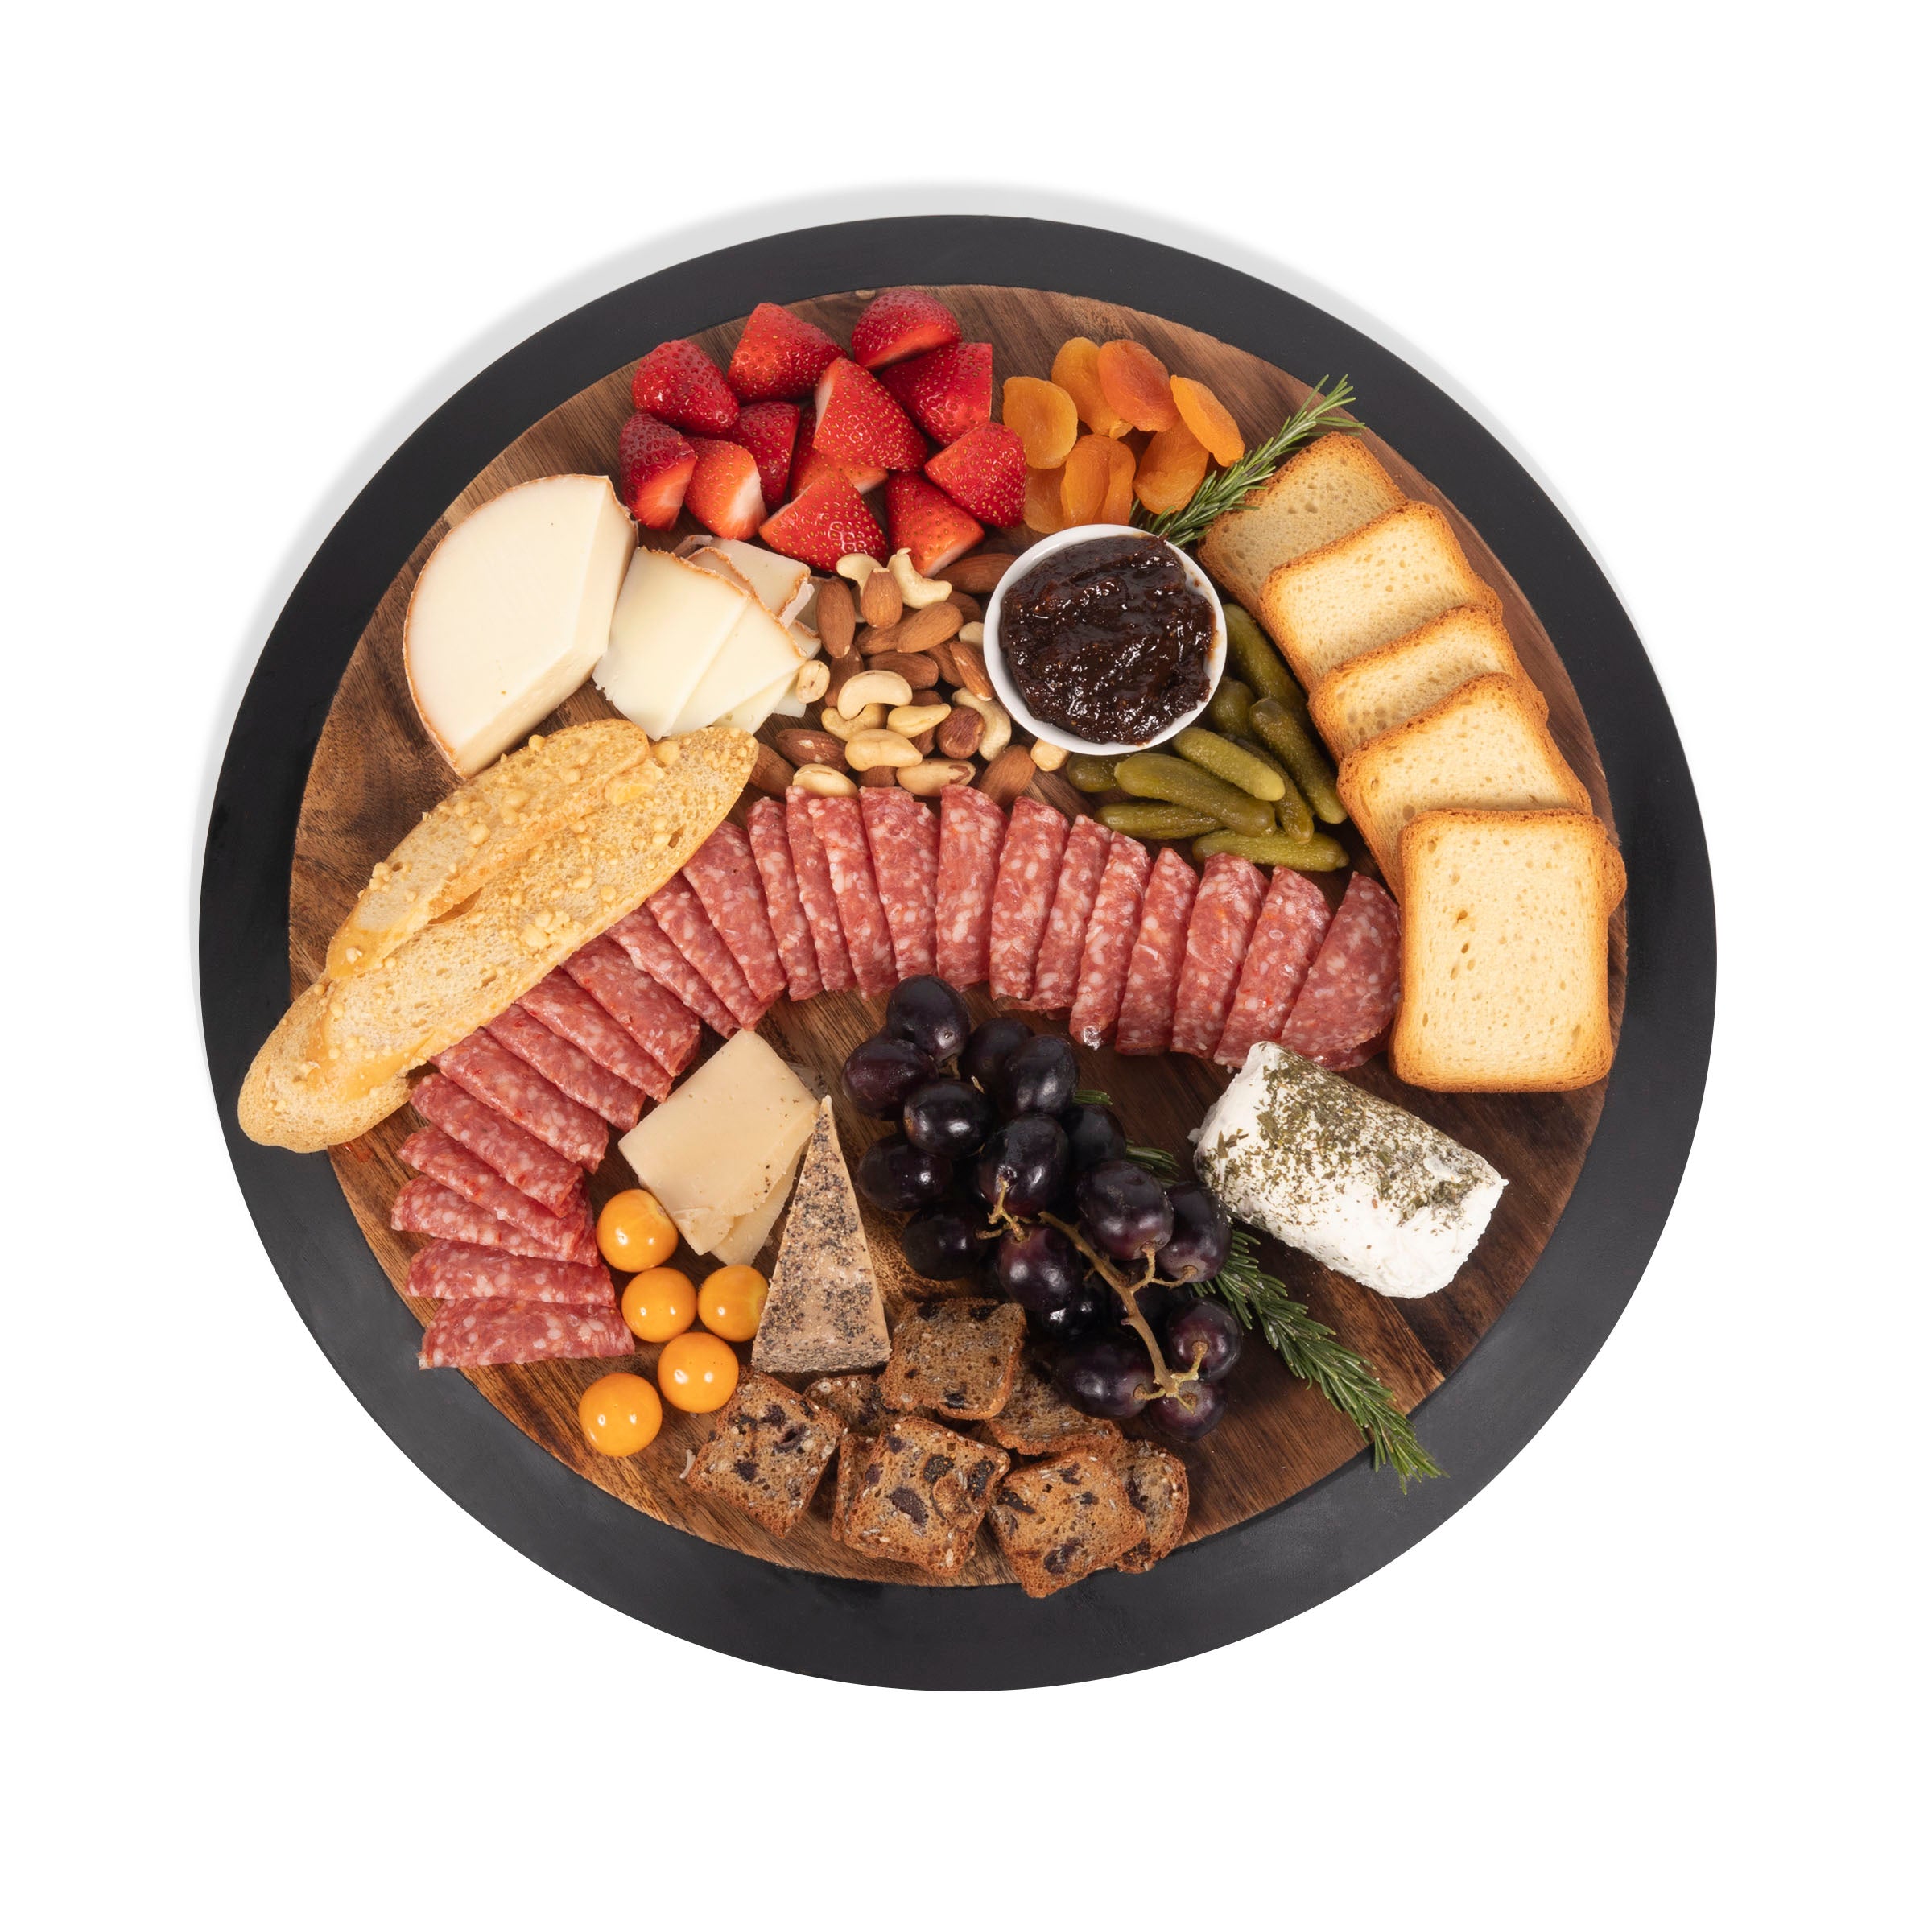 Chicago Cubs - Lazy Susan Serving Tray